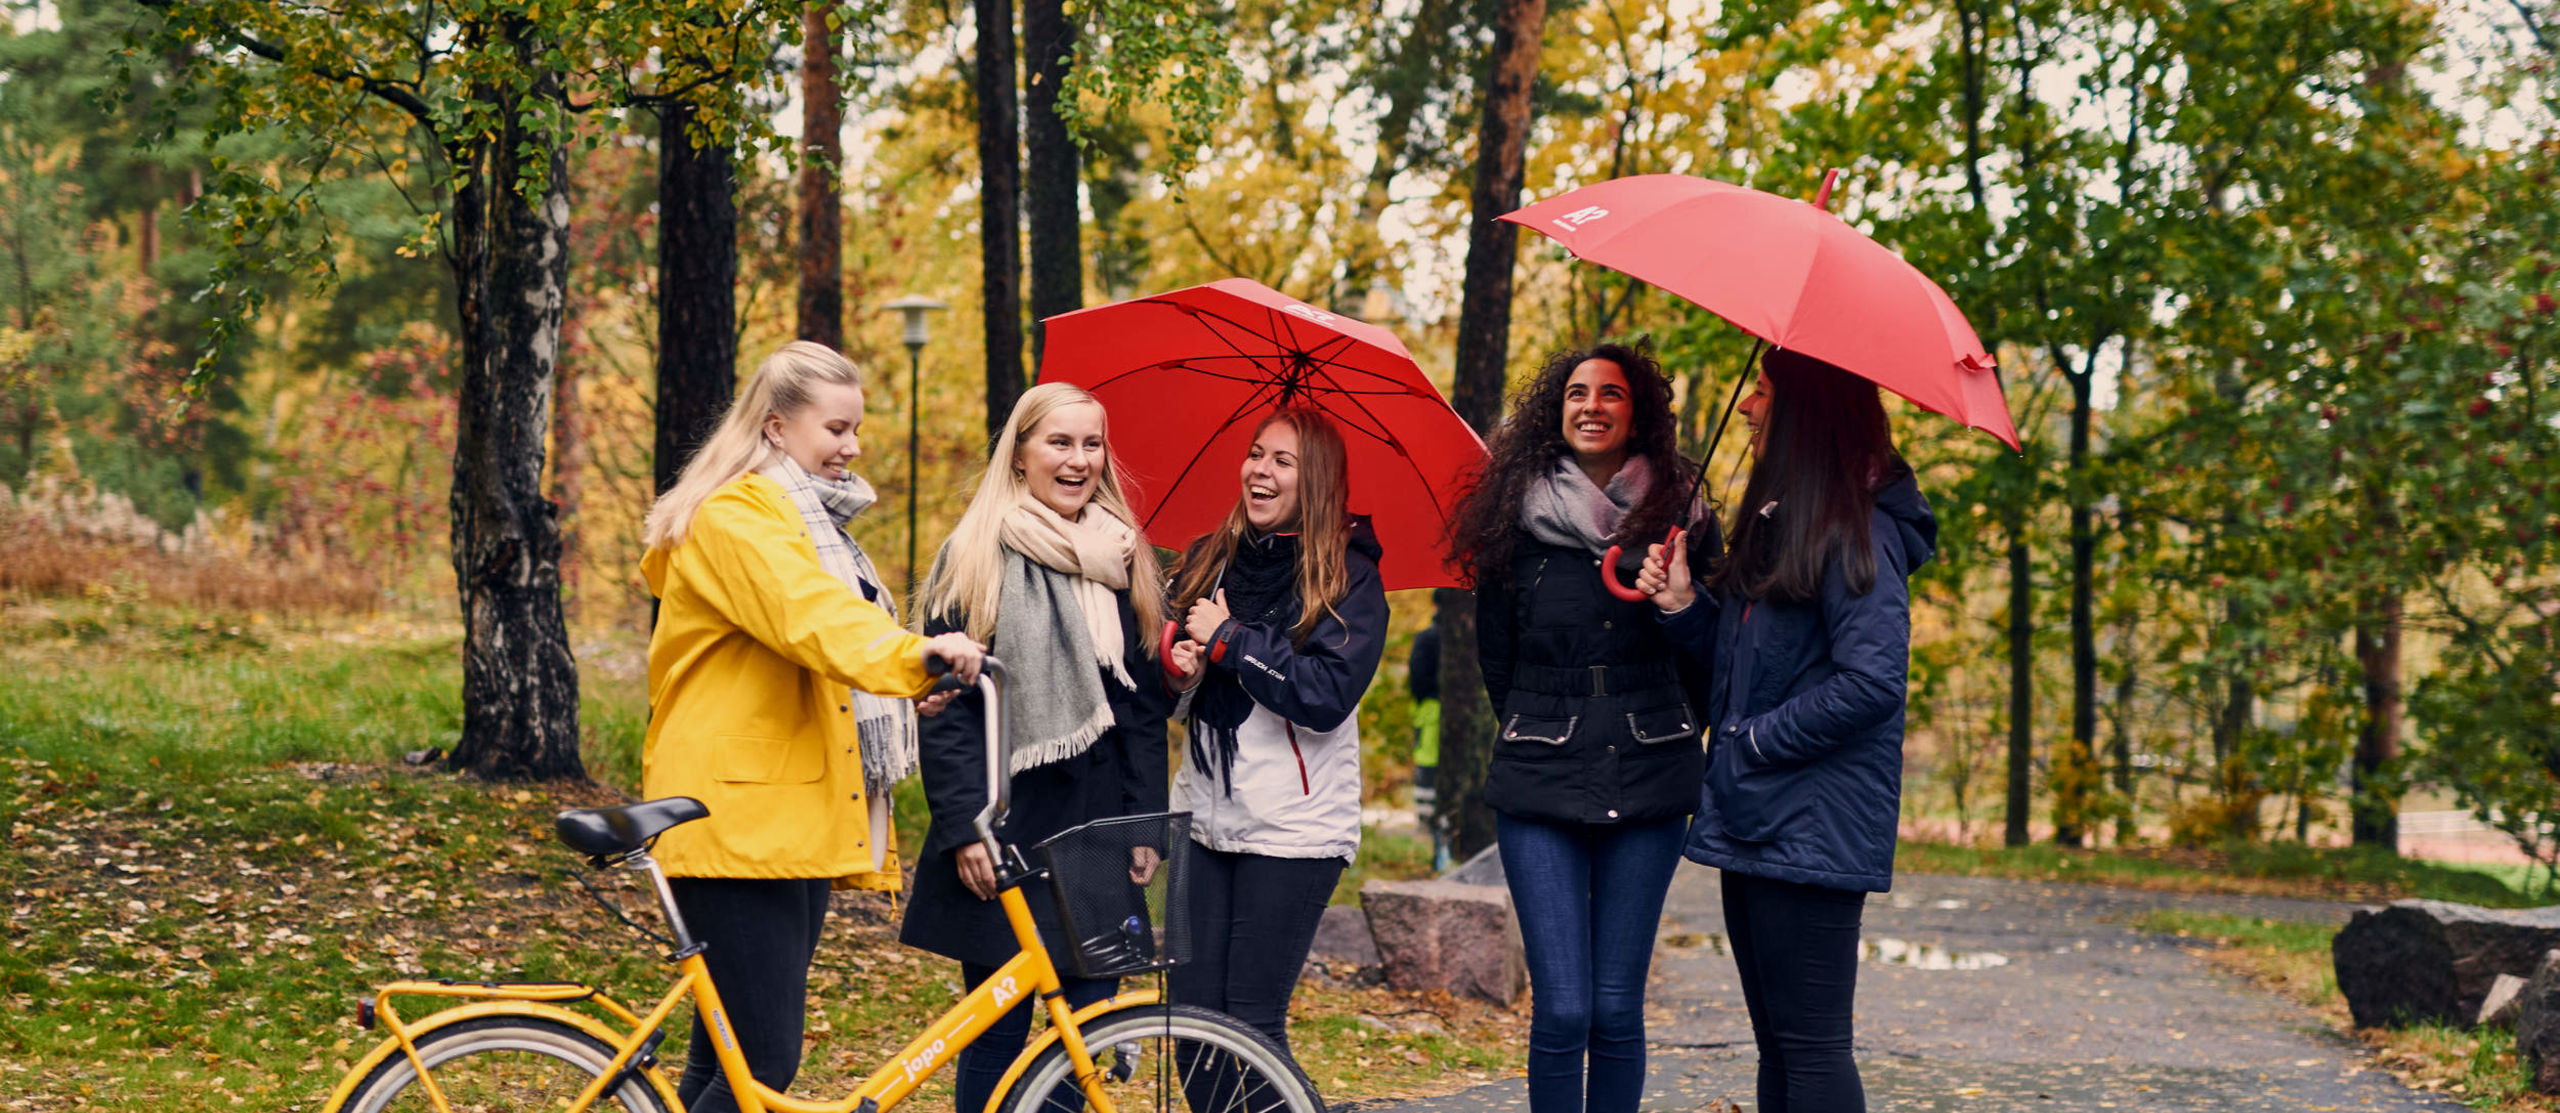 Five people with a yellow bike and red umbrellas on autumnal campus